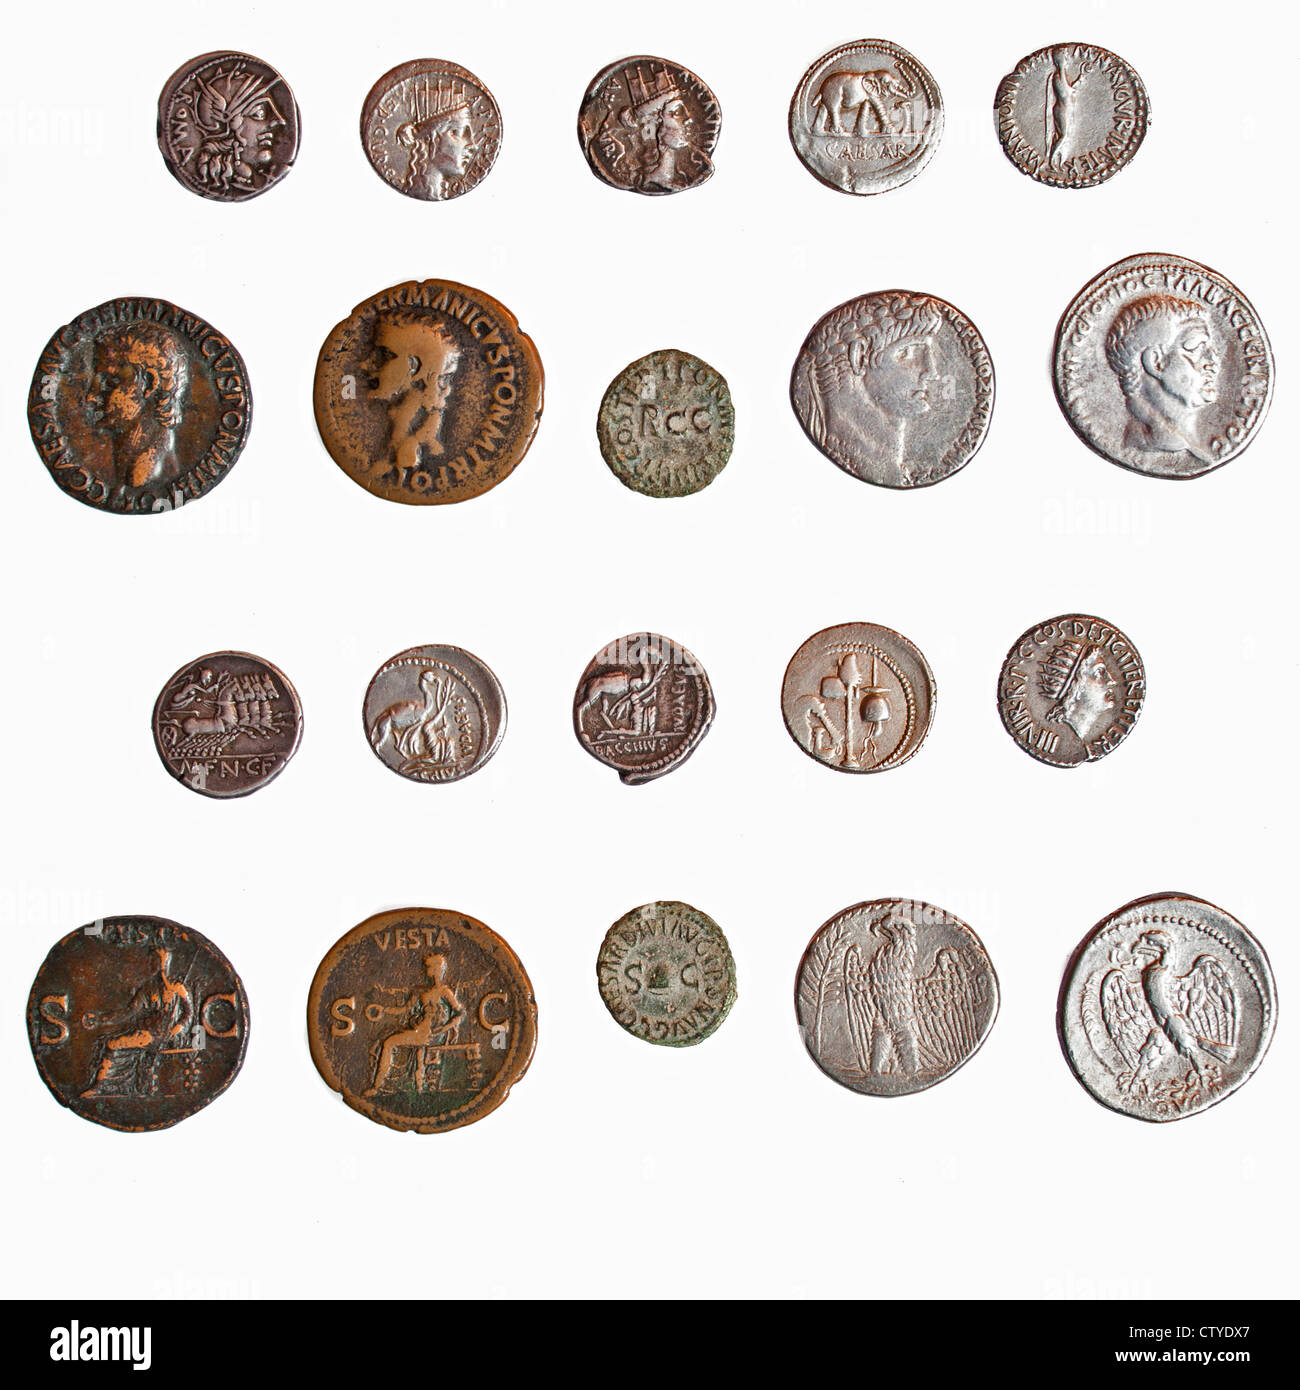 Assortment of Ancient Roman Coins 1st century BCE both sides depicted here (private collection) Stock Photo